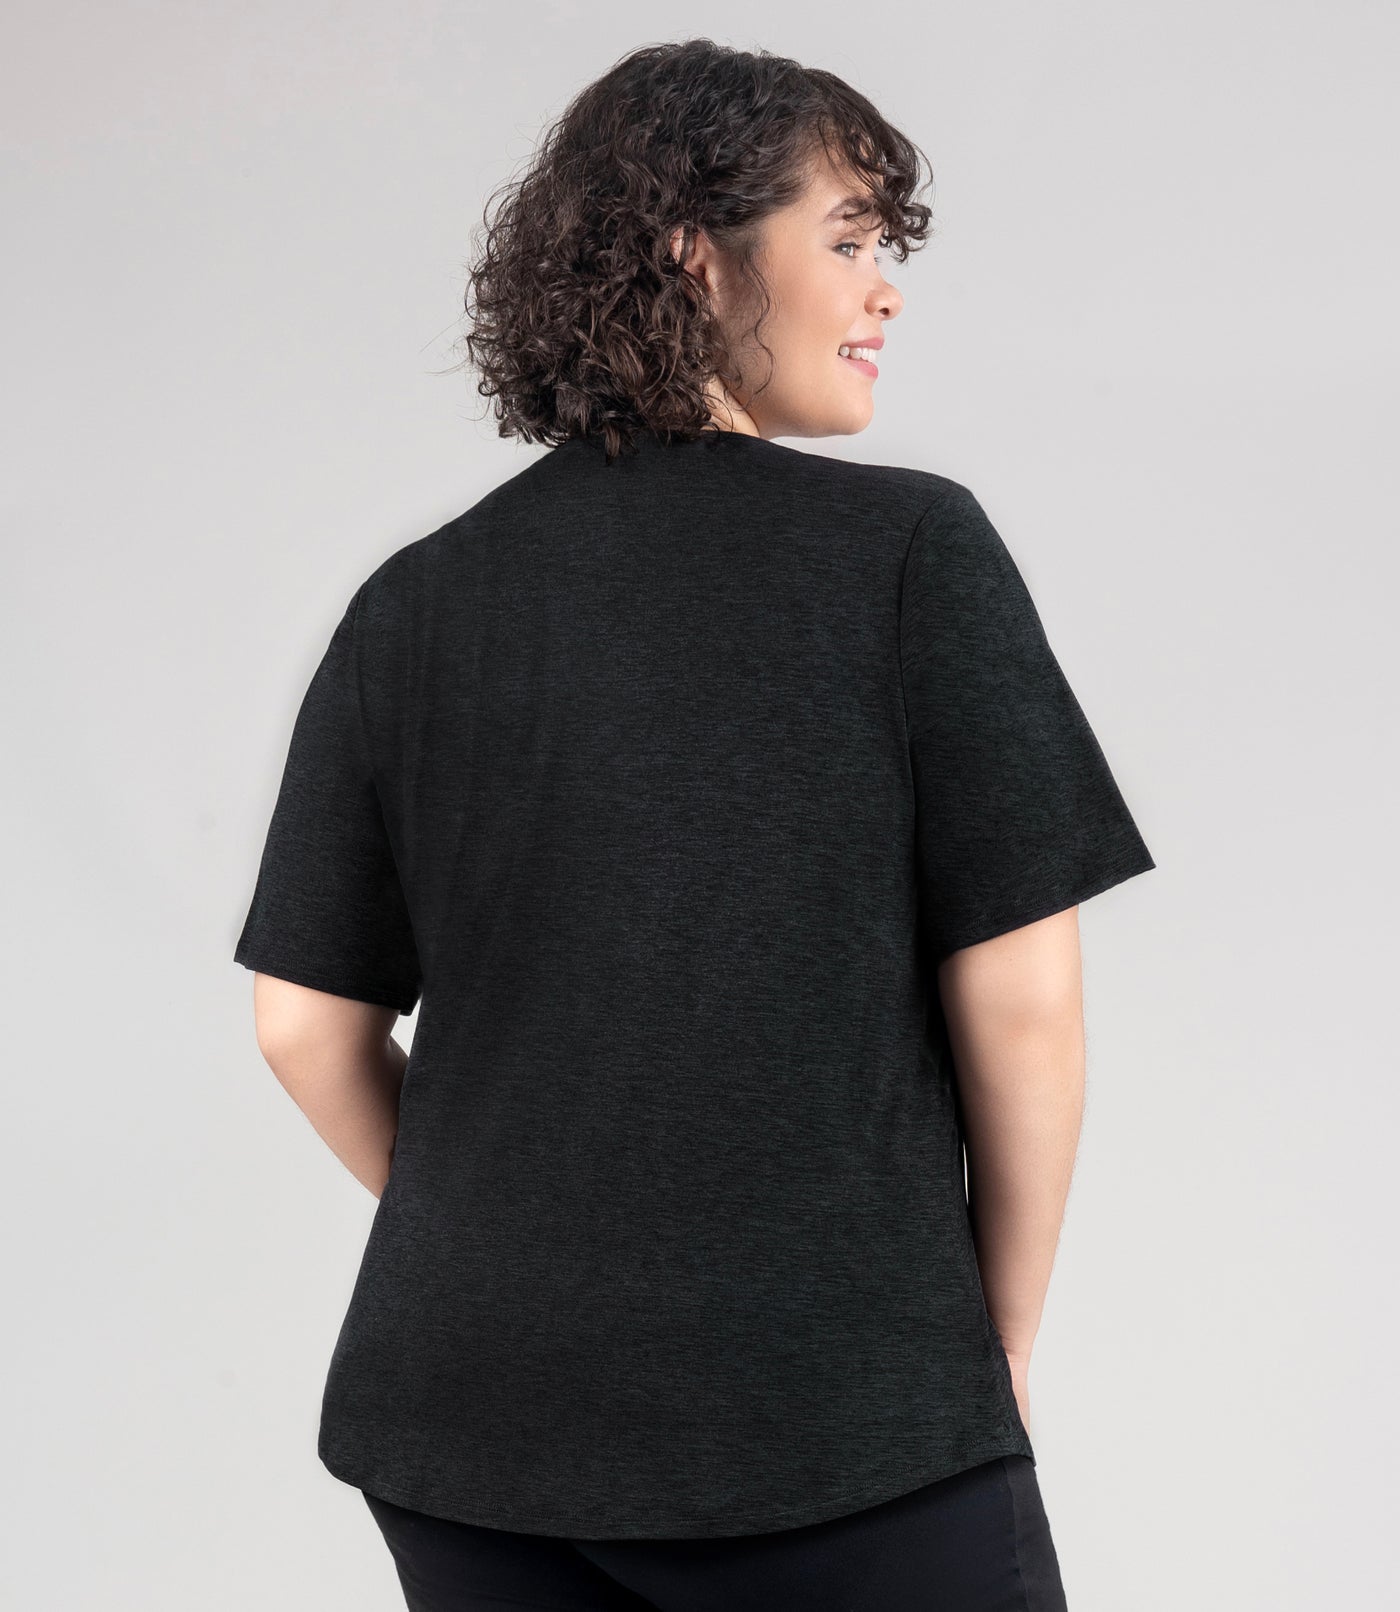 JunoActive model, facing back, wearing soft supreme scoop neck short sleeve top in color heather black. Her arms are by her side. Length of sleeve is about 1.5 inches above elbow.